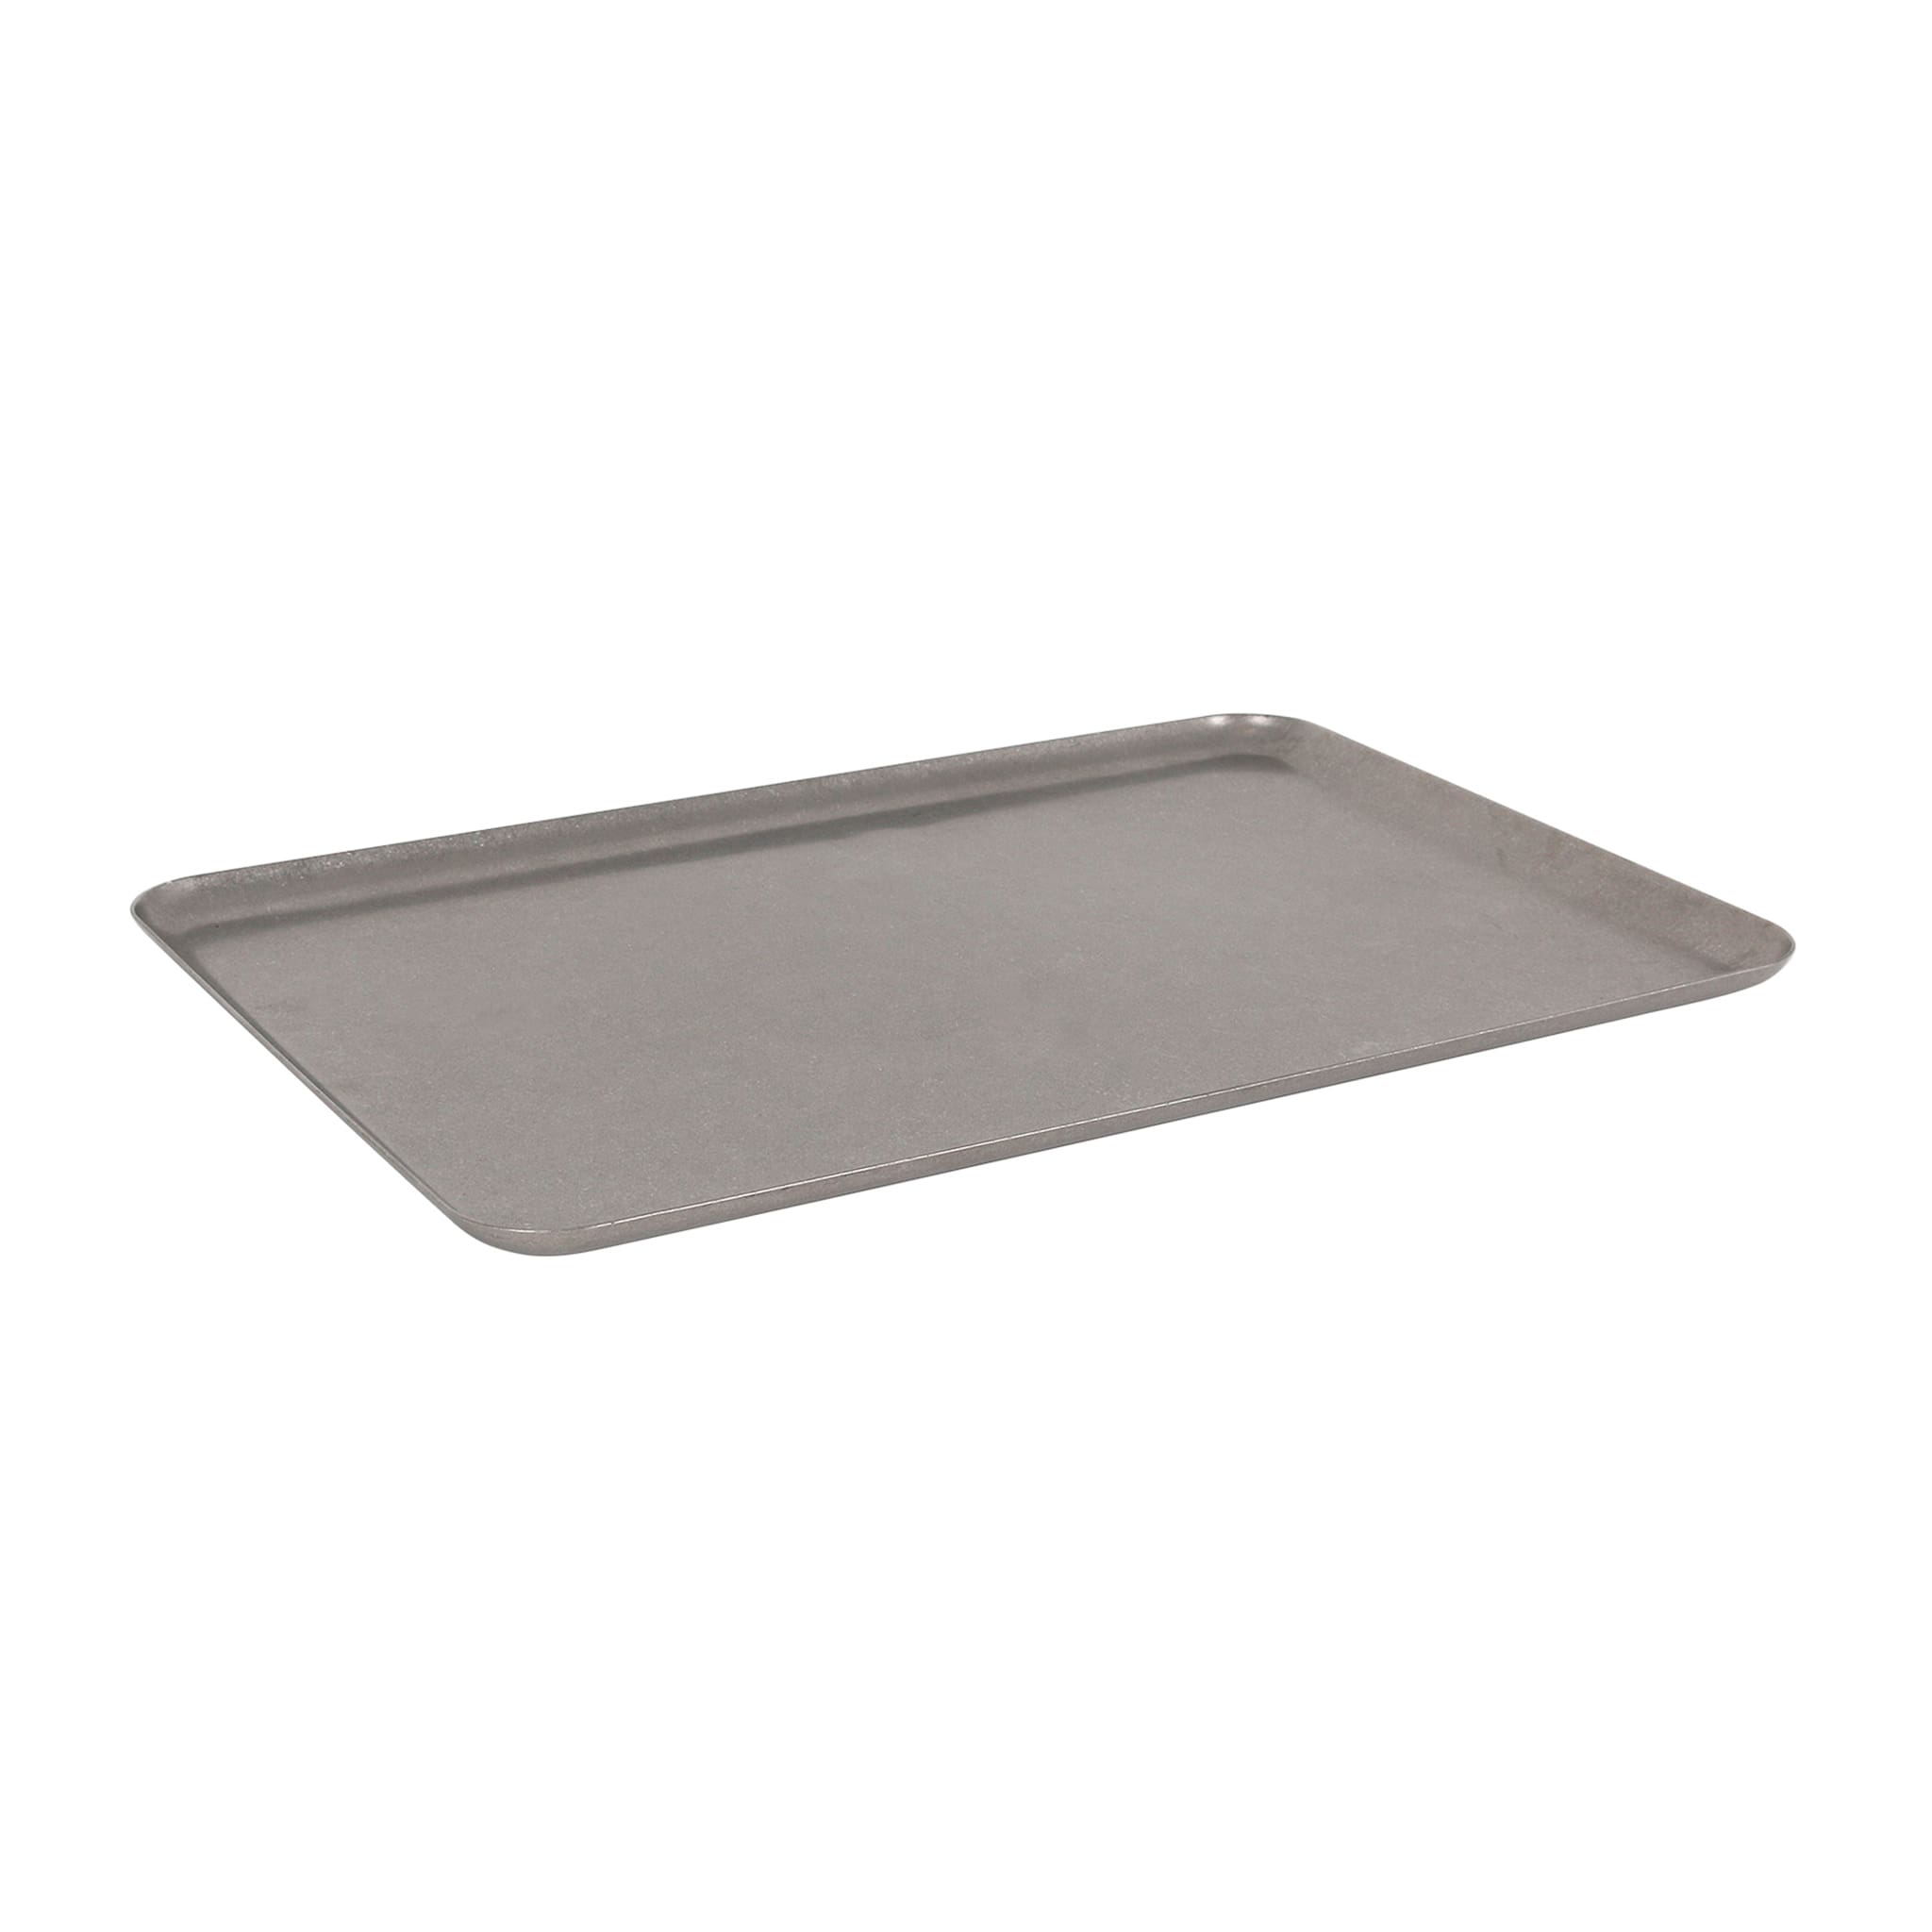 Vintage Style Stainless Steel Rectangular Serving Tray, 30x20.5cm